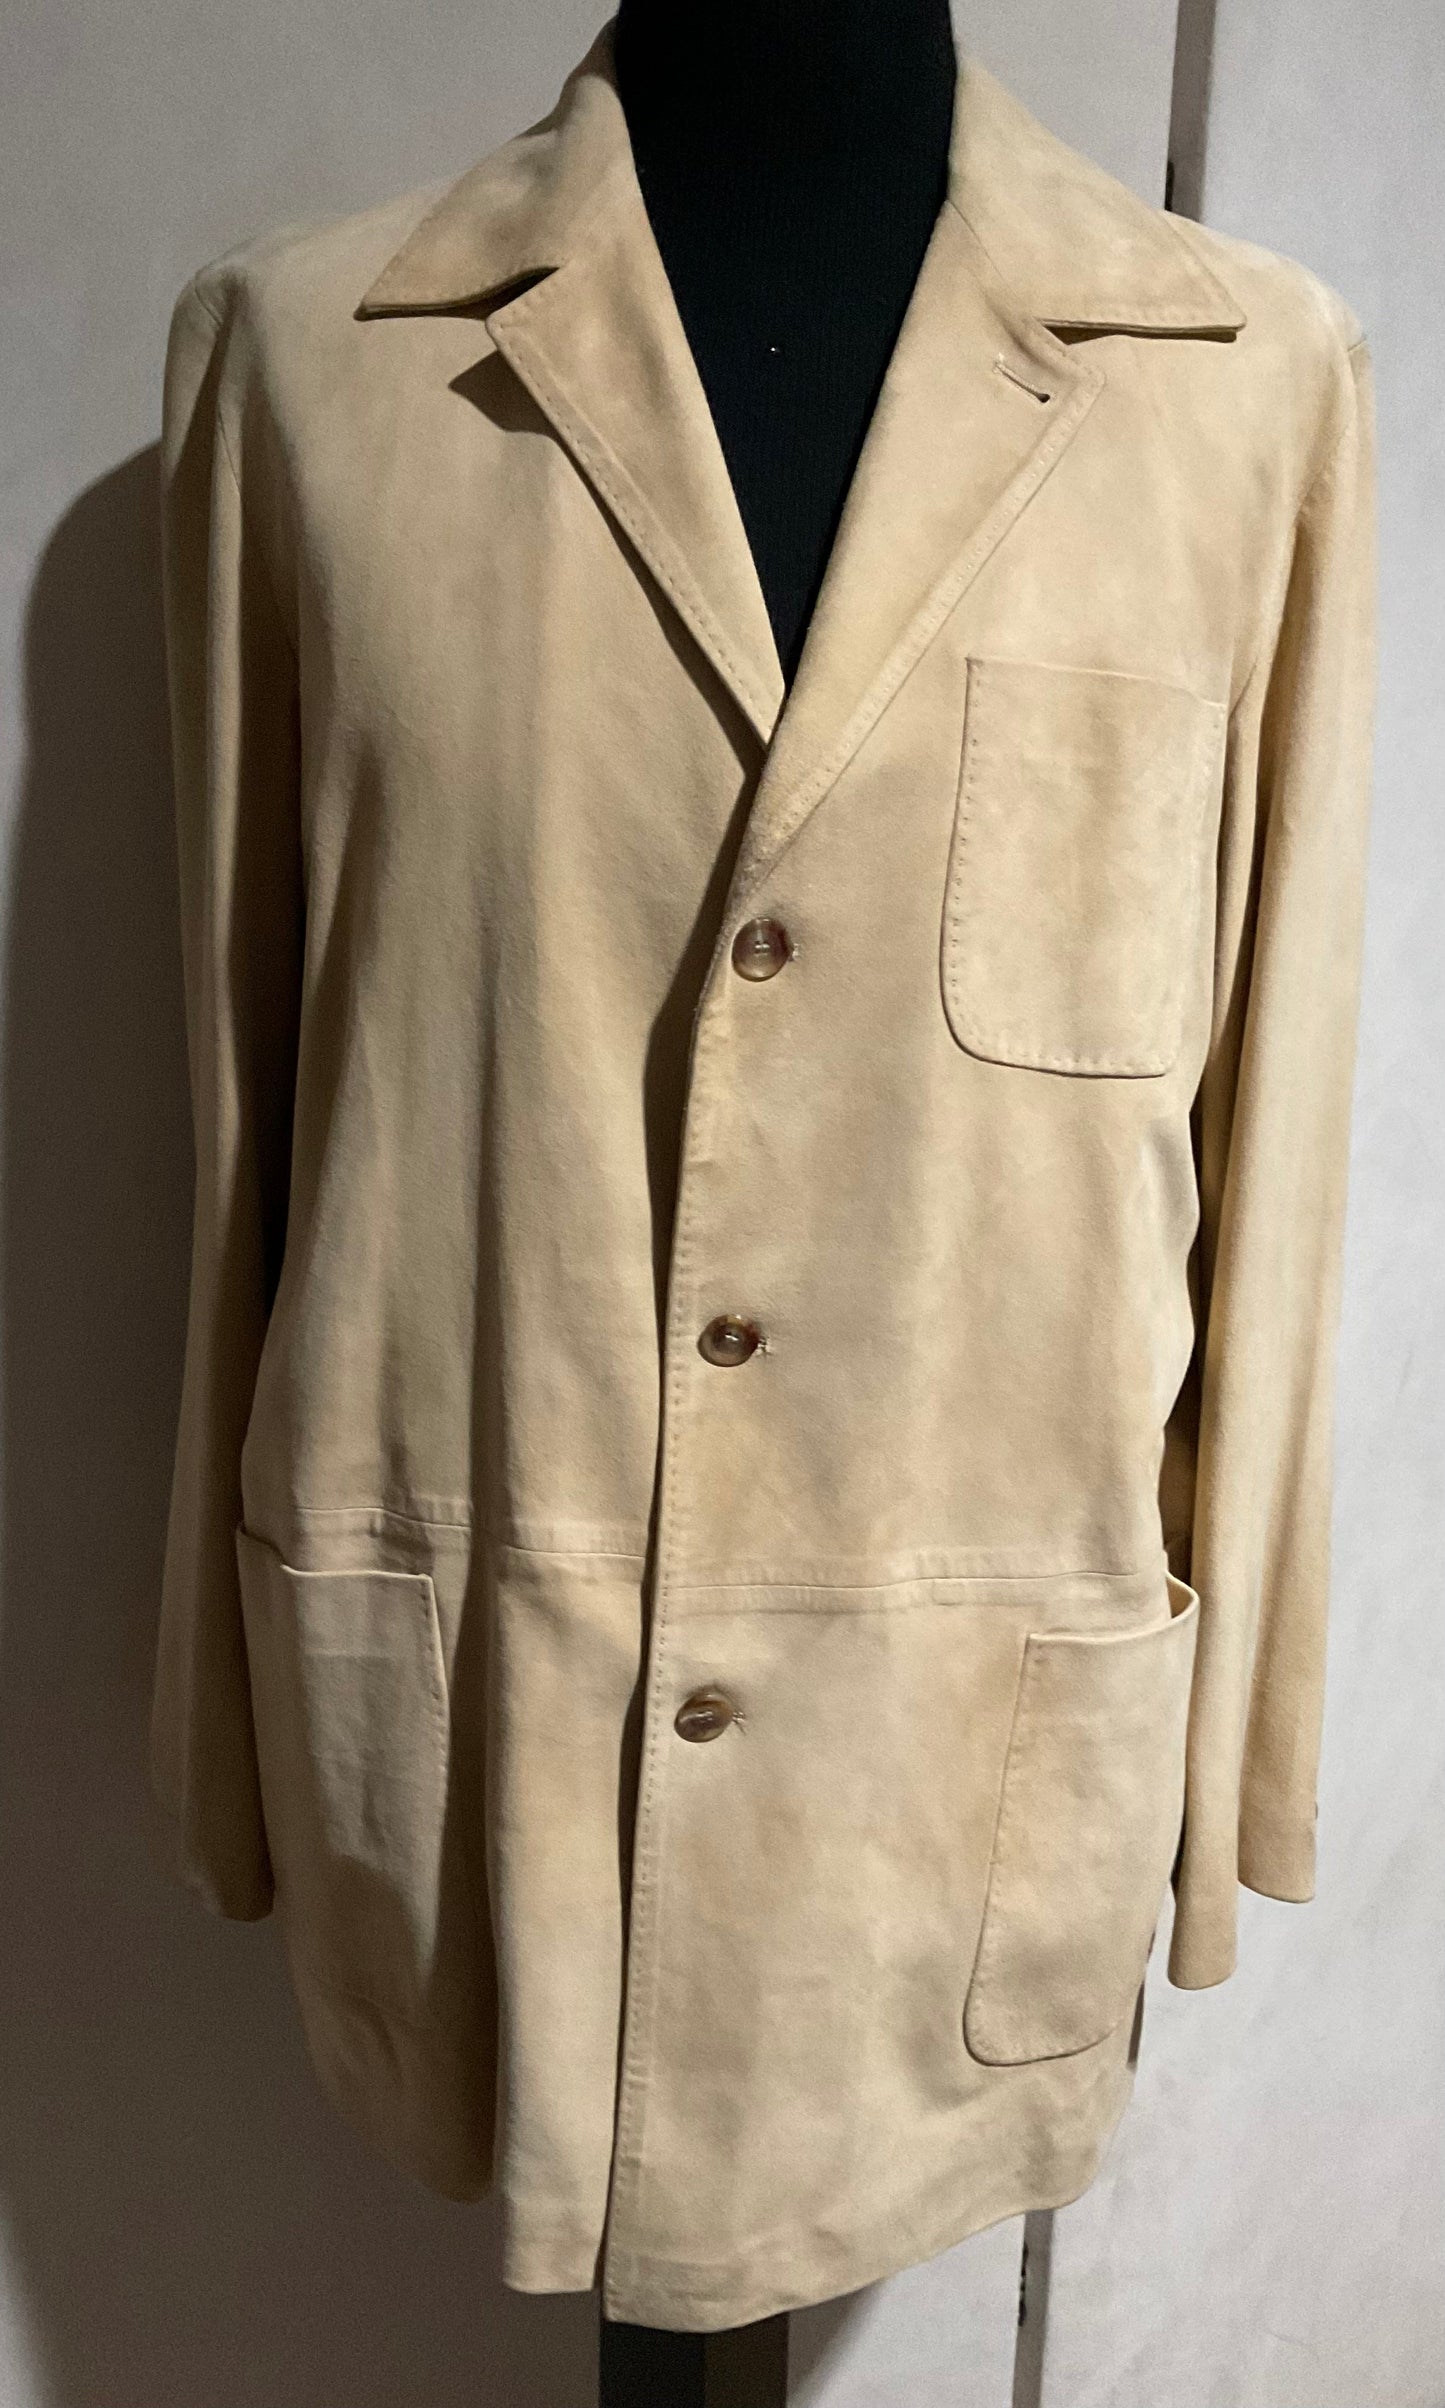 R P SUEDE JACKET / CREAM / MEDIUM - LARGE / NEW / MADE IN ITALY